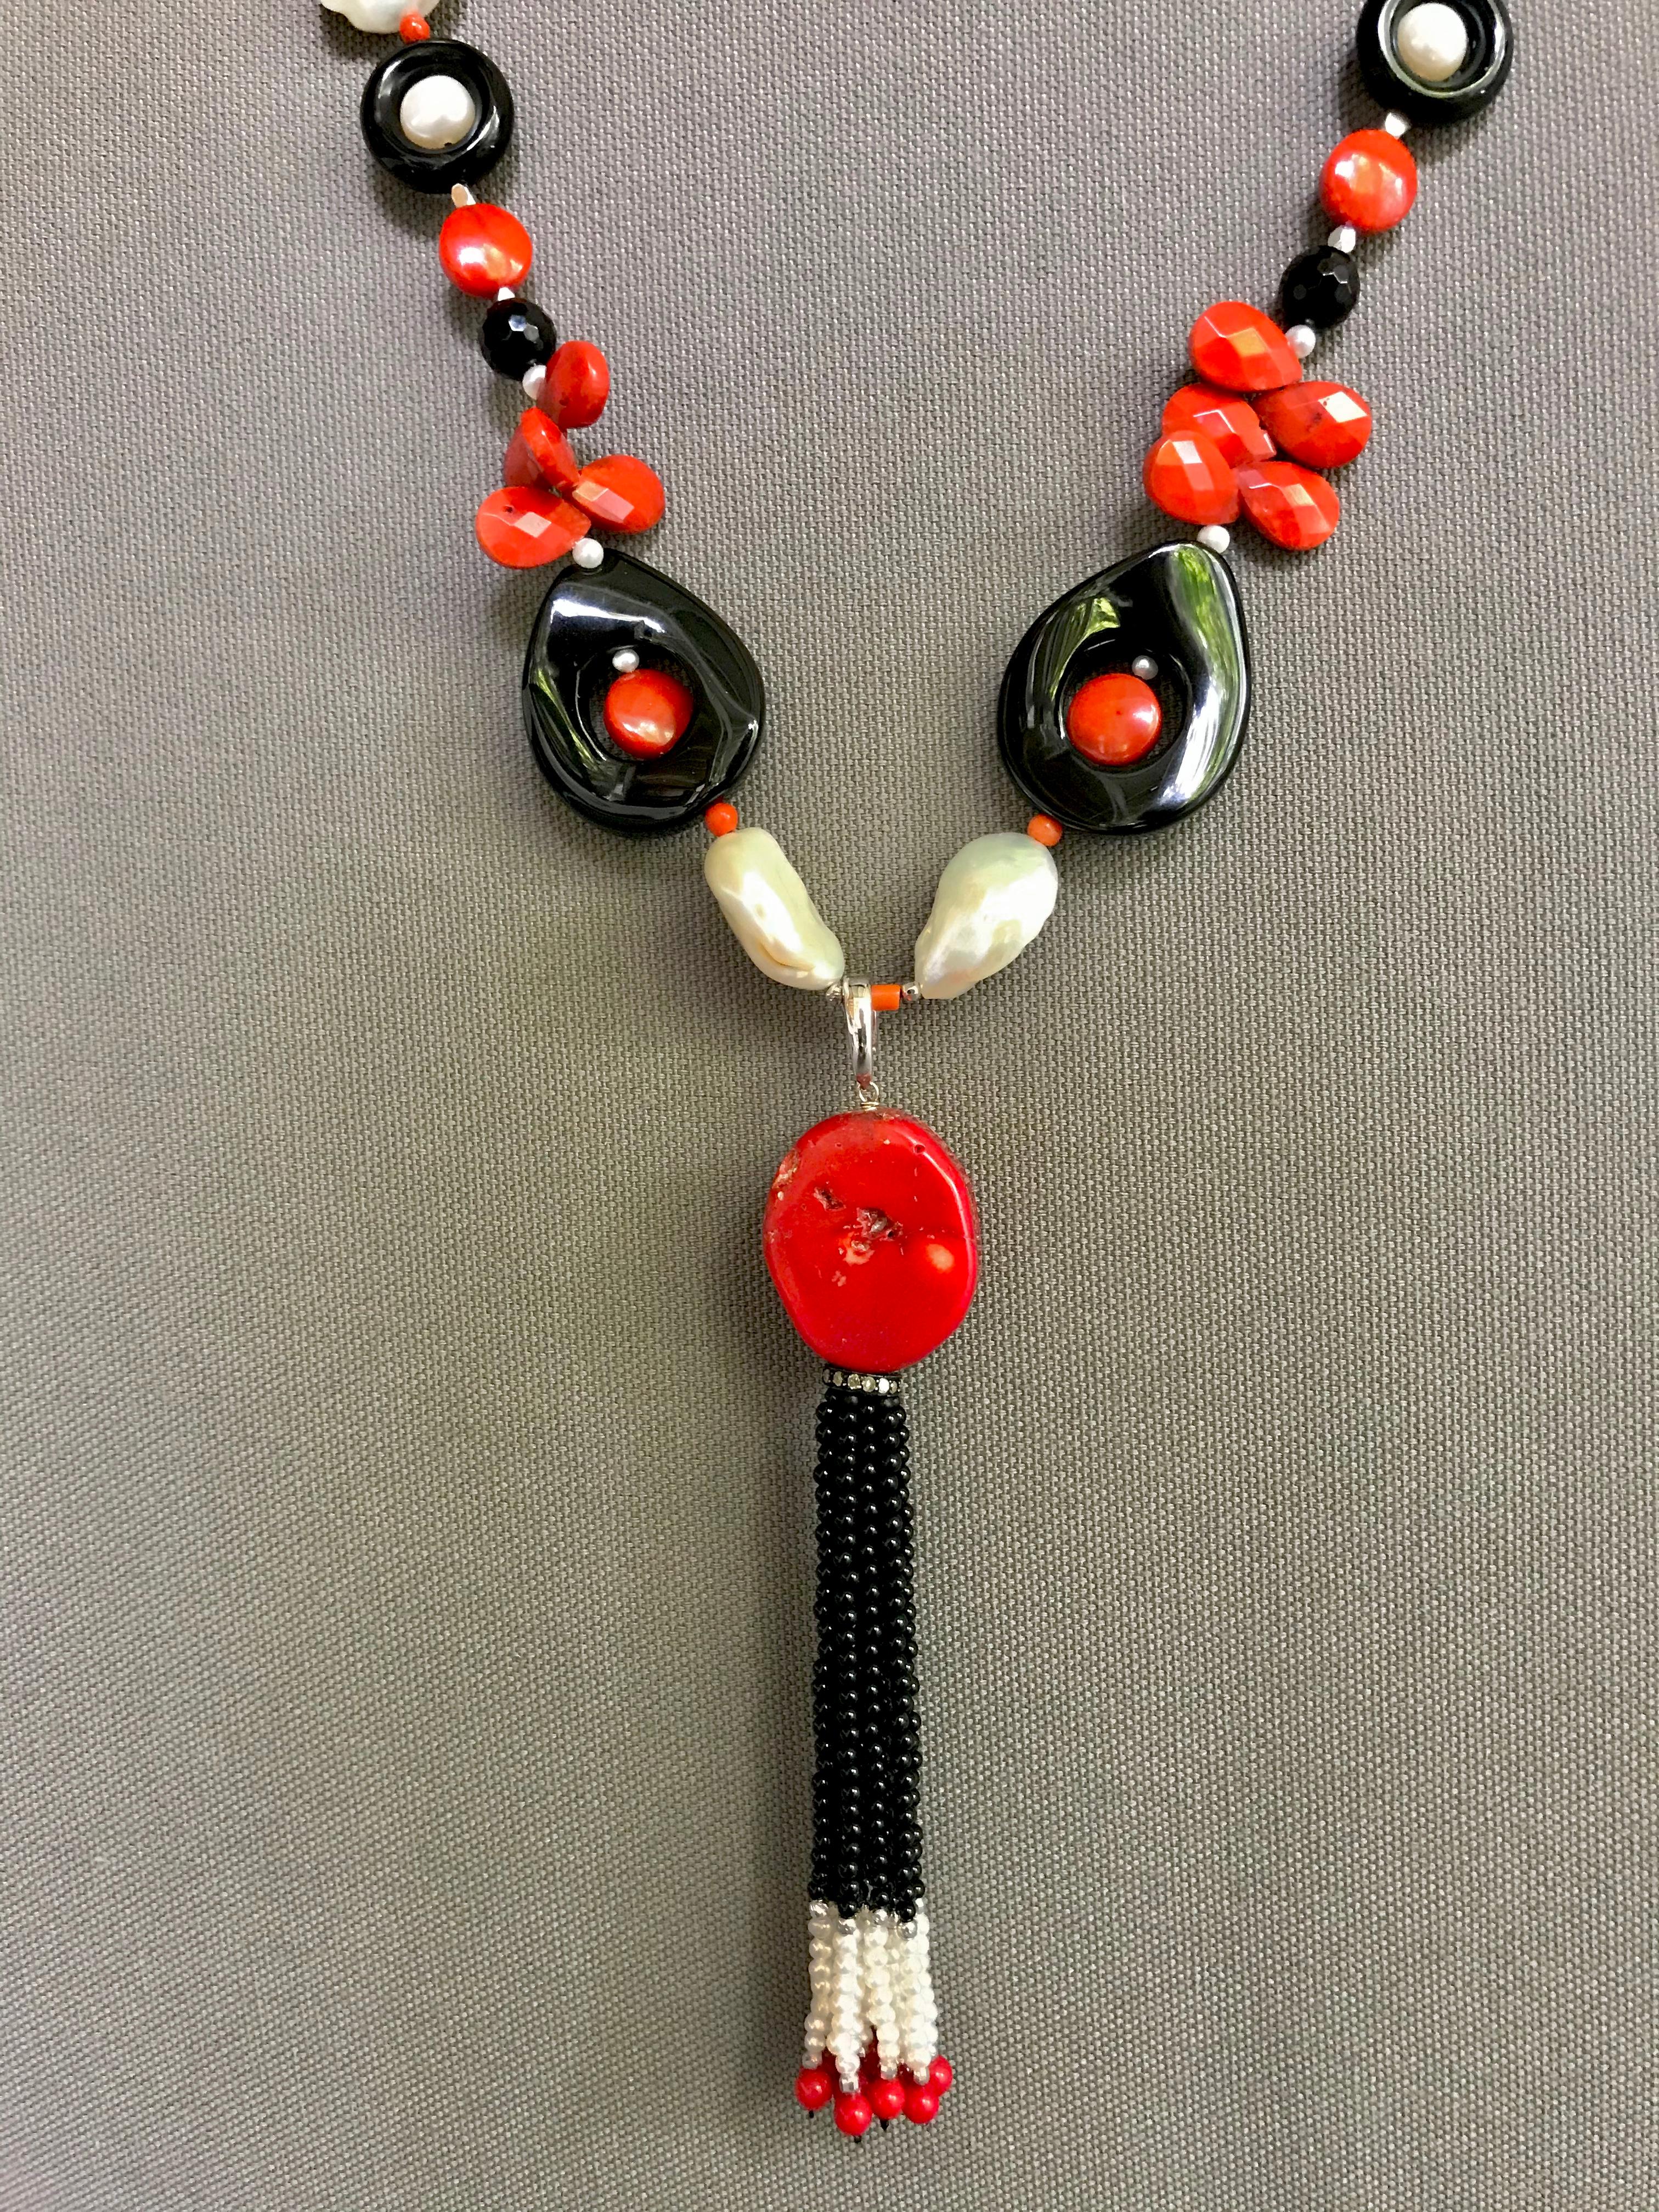 Brilliant Cut Marina J. Art Deco Style Sautoir Necklace with Pearl, Coral, Onyx and Tassel